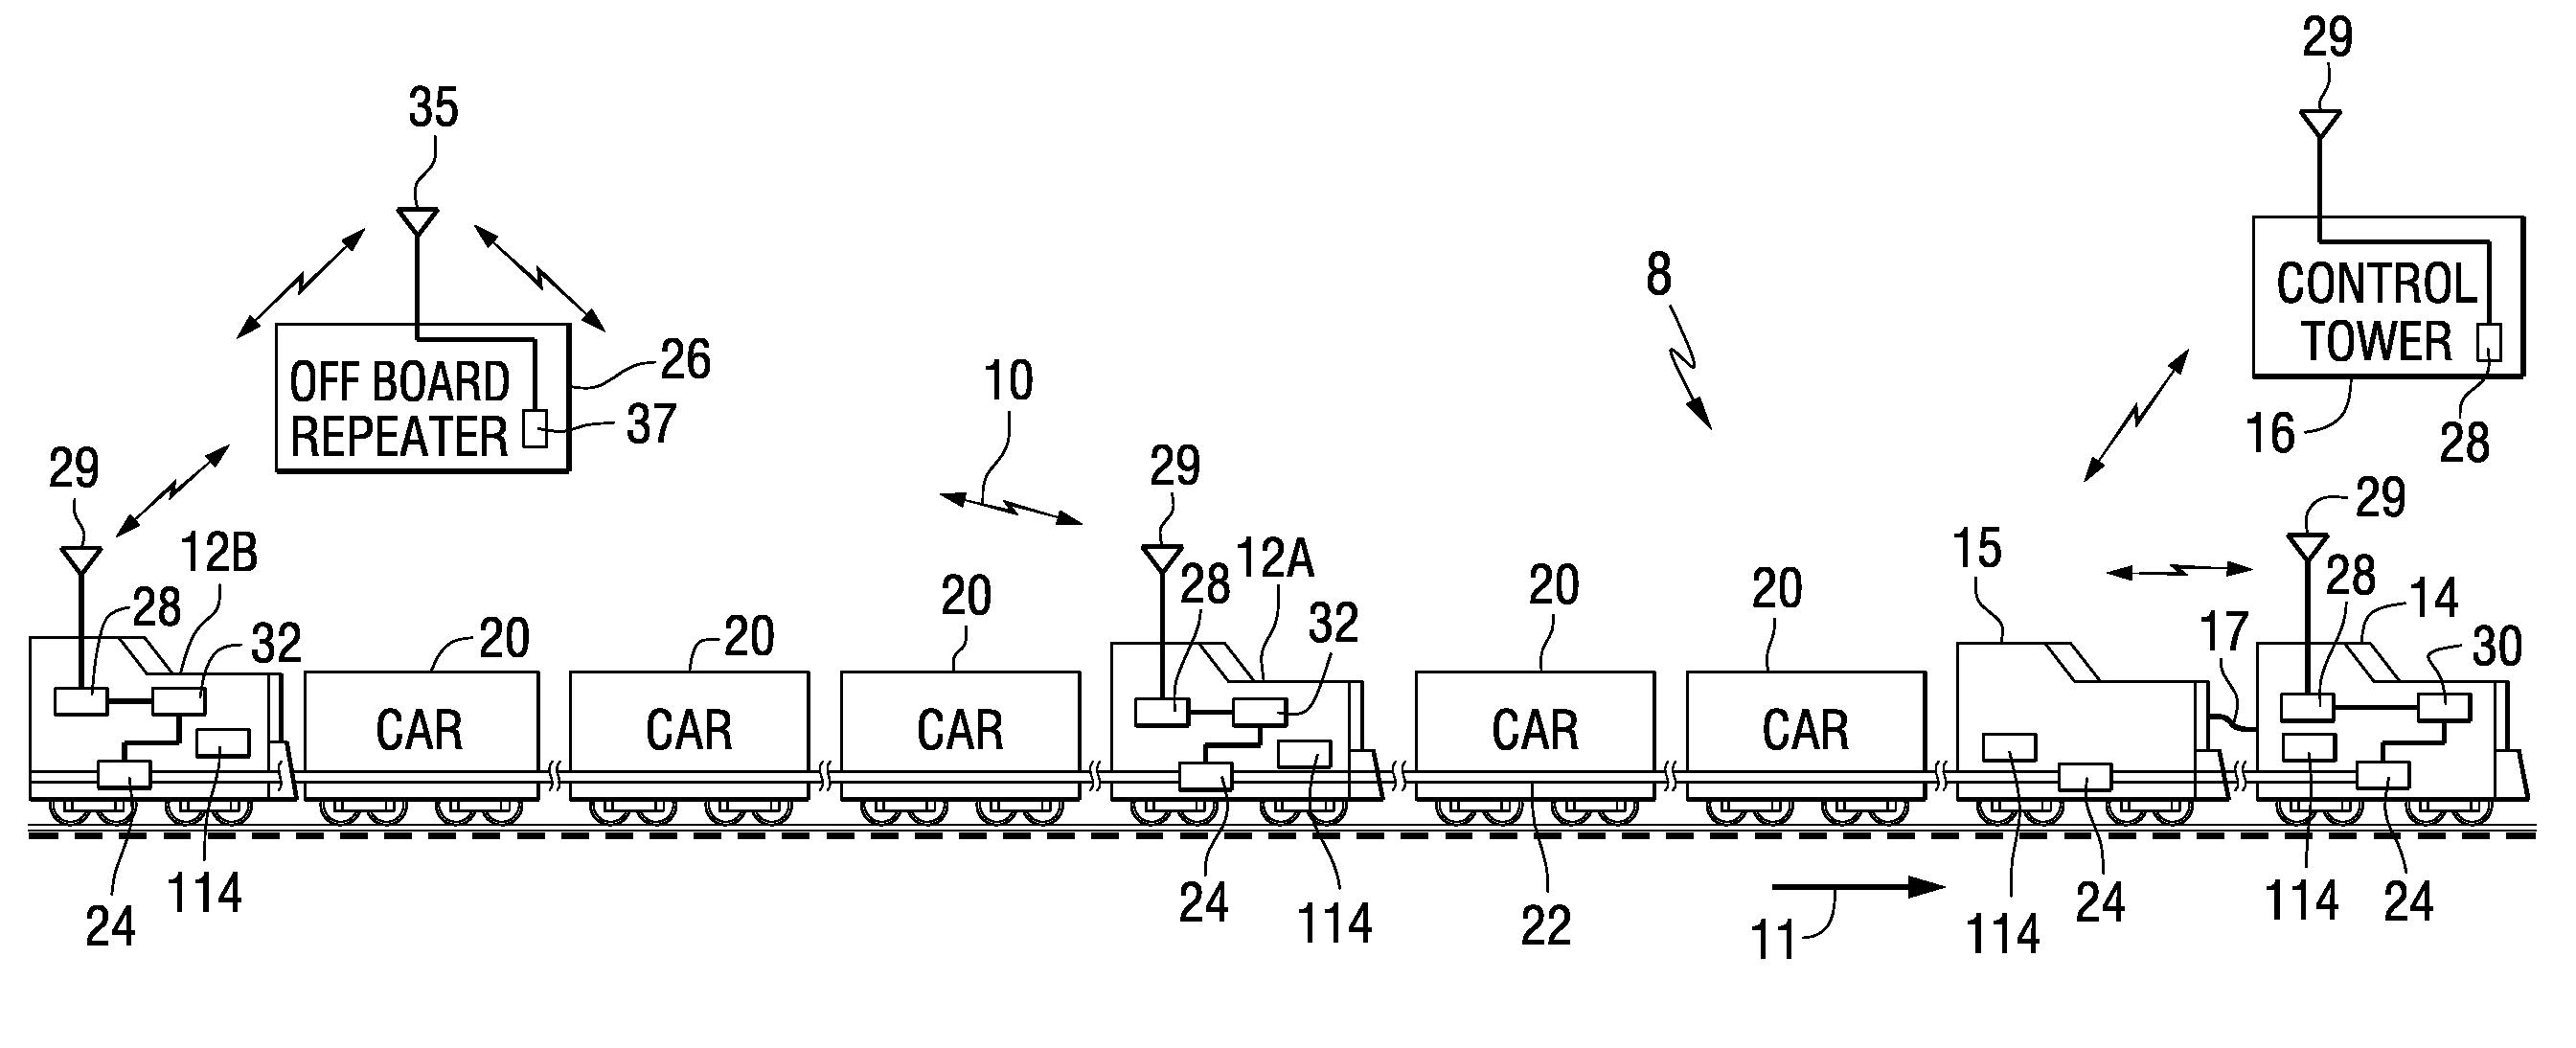 Control of throttle and braking actions at individual distributed power locomotives in a railroad train